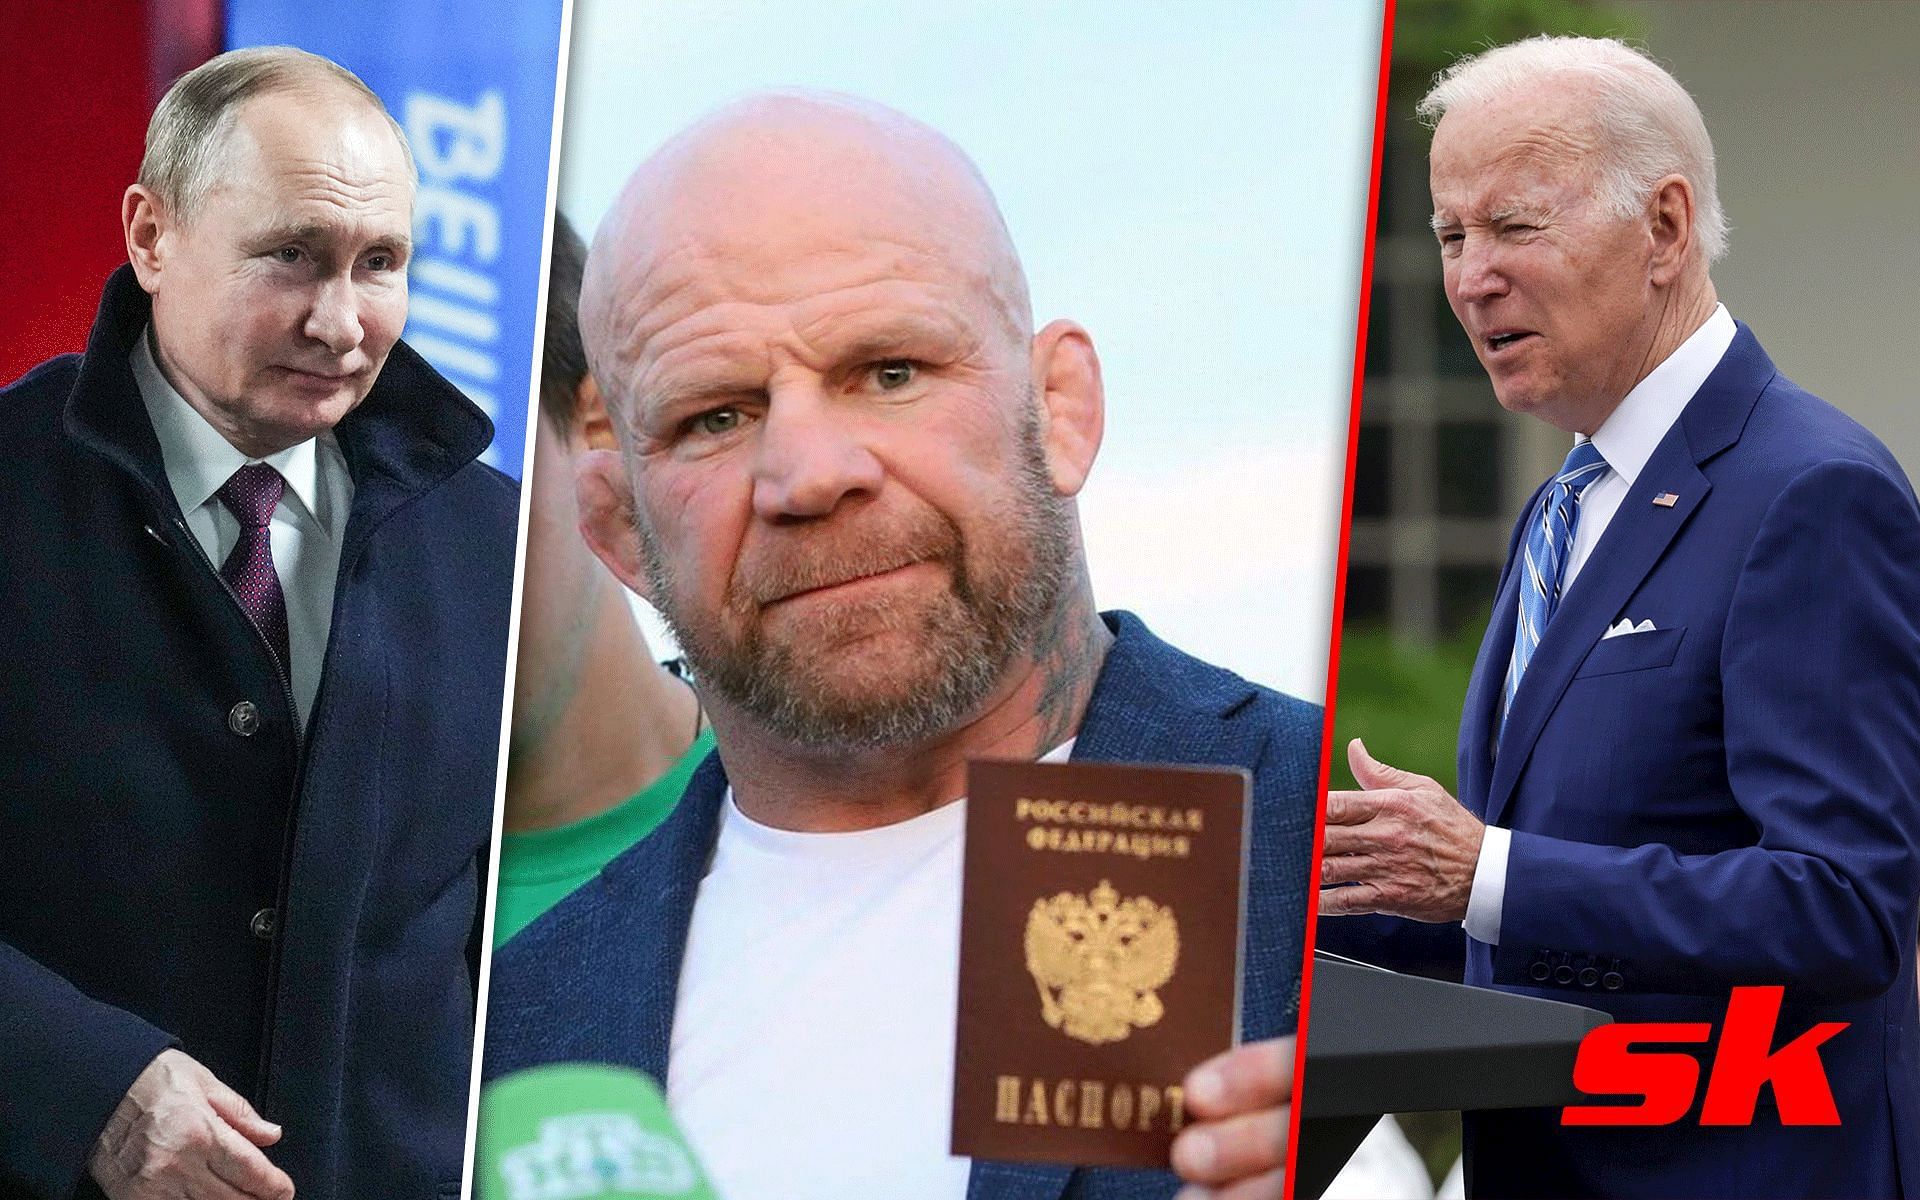 Former UFC fighter renounces U.S. citizenship, will only retain Russian passport [Images via: @jeff_monson_official on Instagram]